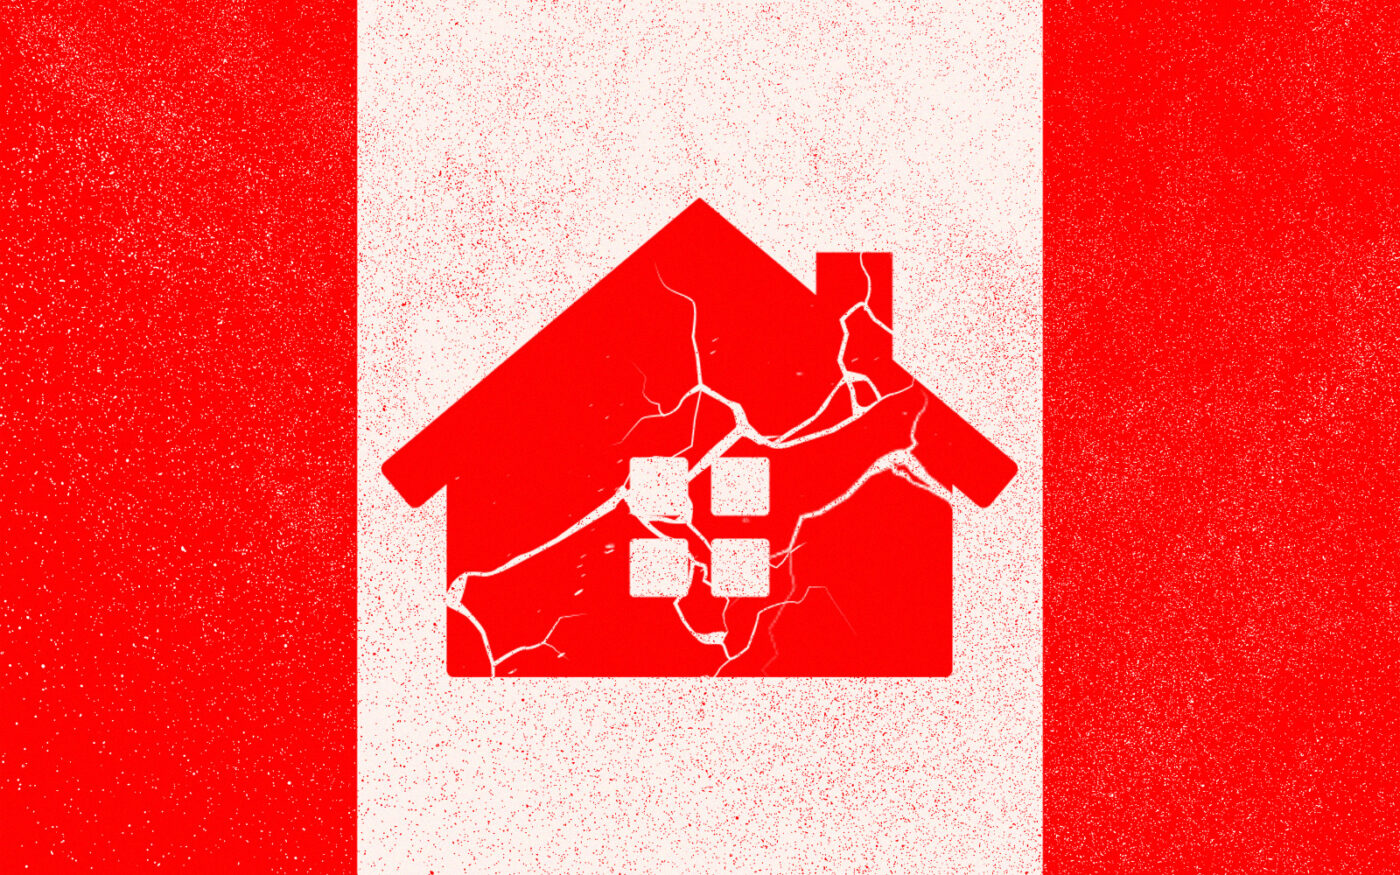 Canadian flag with house instead of maple leaf